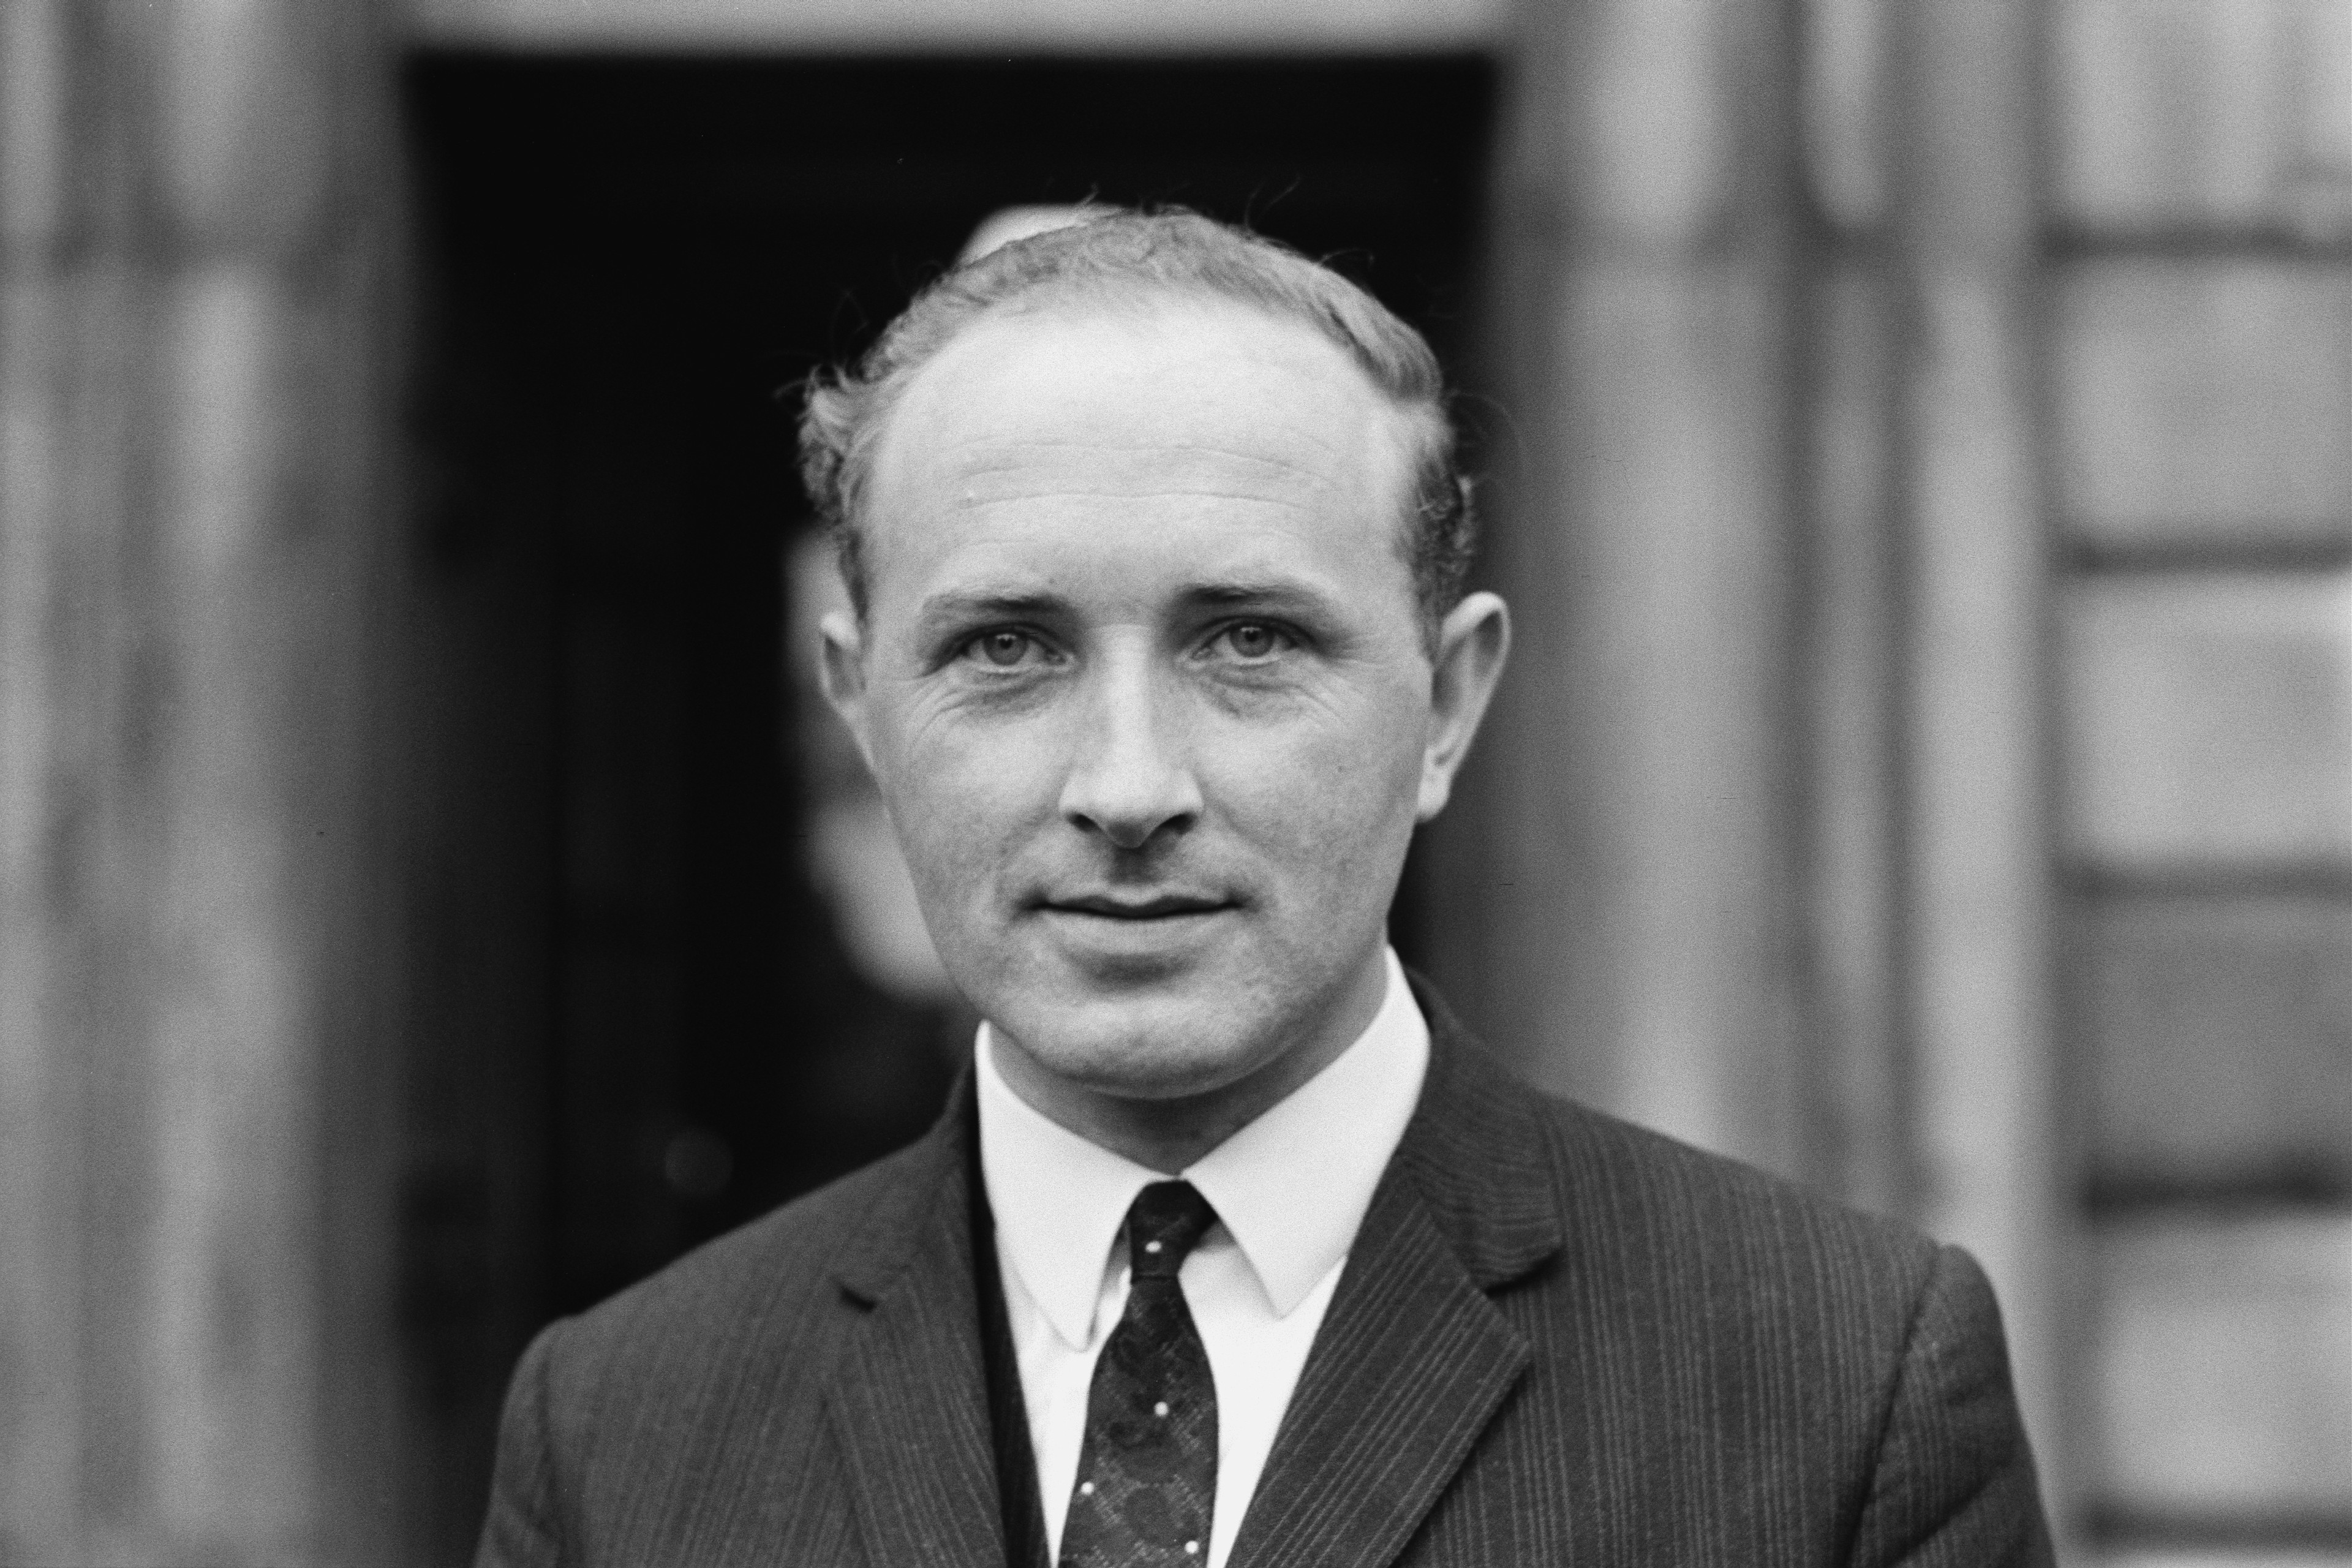 Black and white head and shoulders photograph of Billy Fox, a former Member of Seanad Éireann